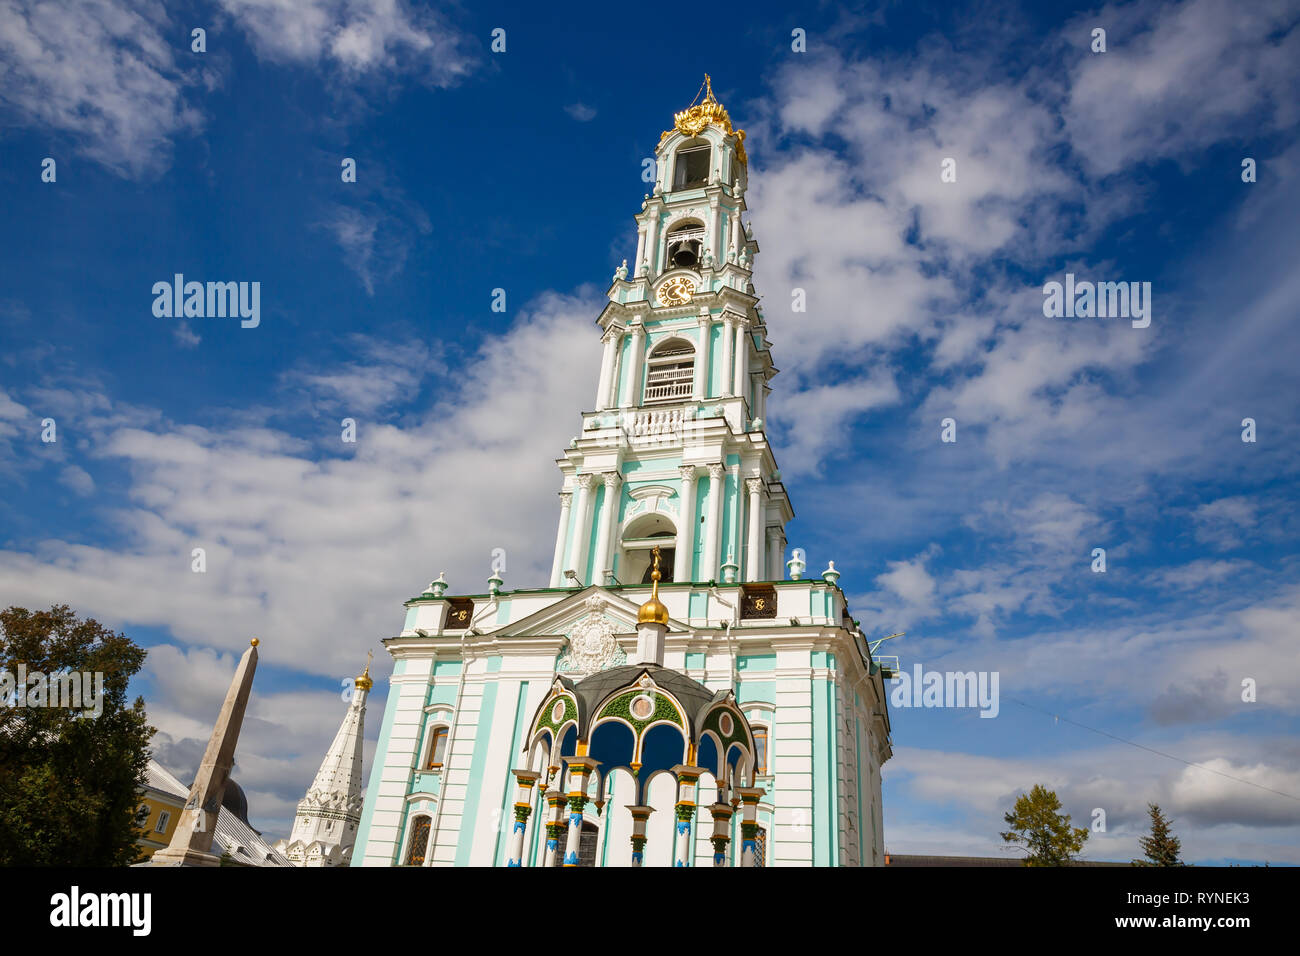 The Belfry in The Holy Trinity Lavra of St. Sergius in Sergiev Posad, Russia. Stock Photo